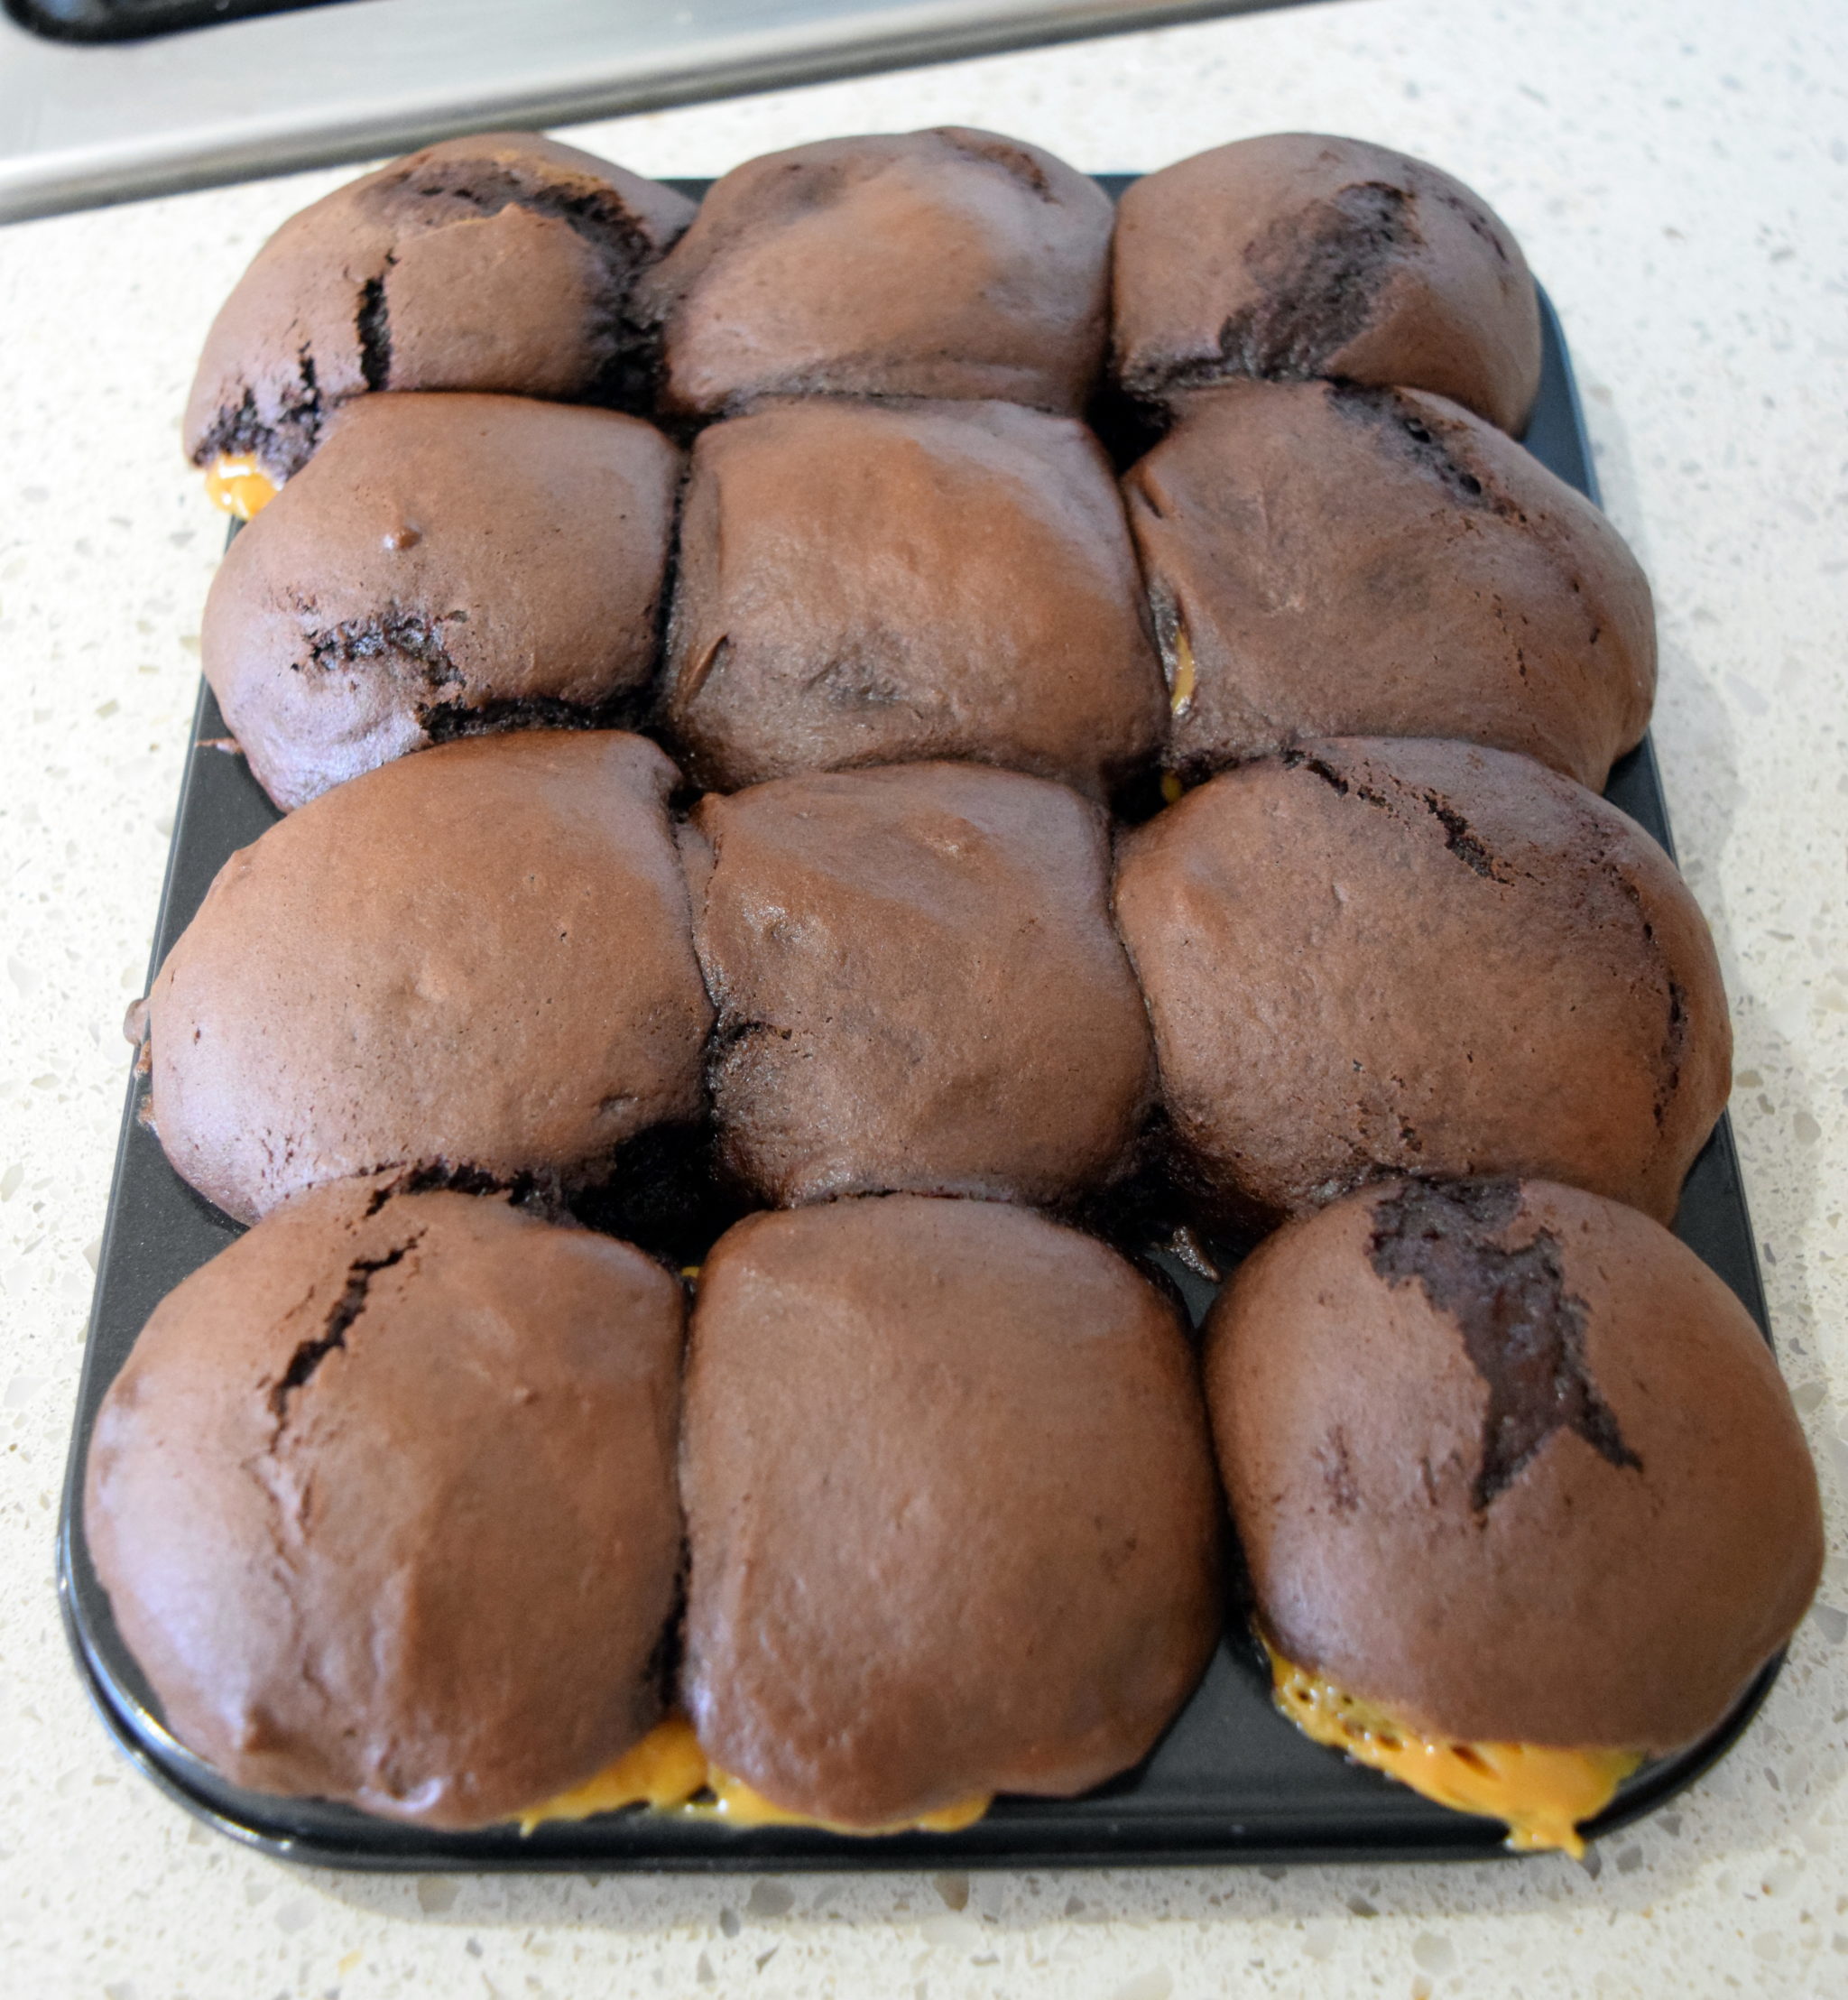 Fresh from the oven, Part Deux: Choc Caramel Muffins